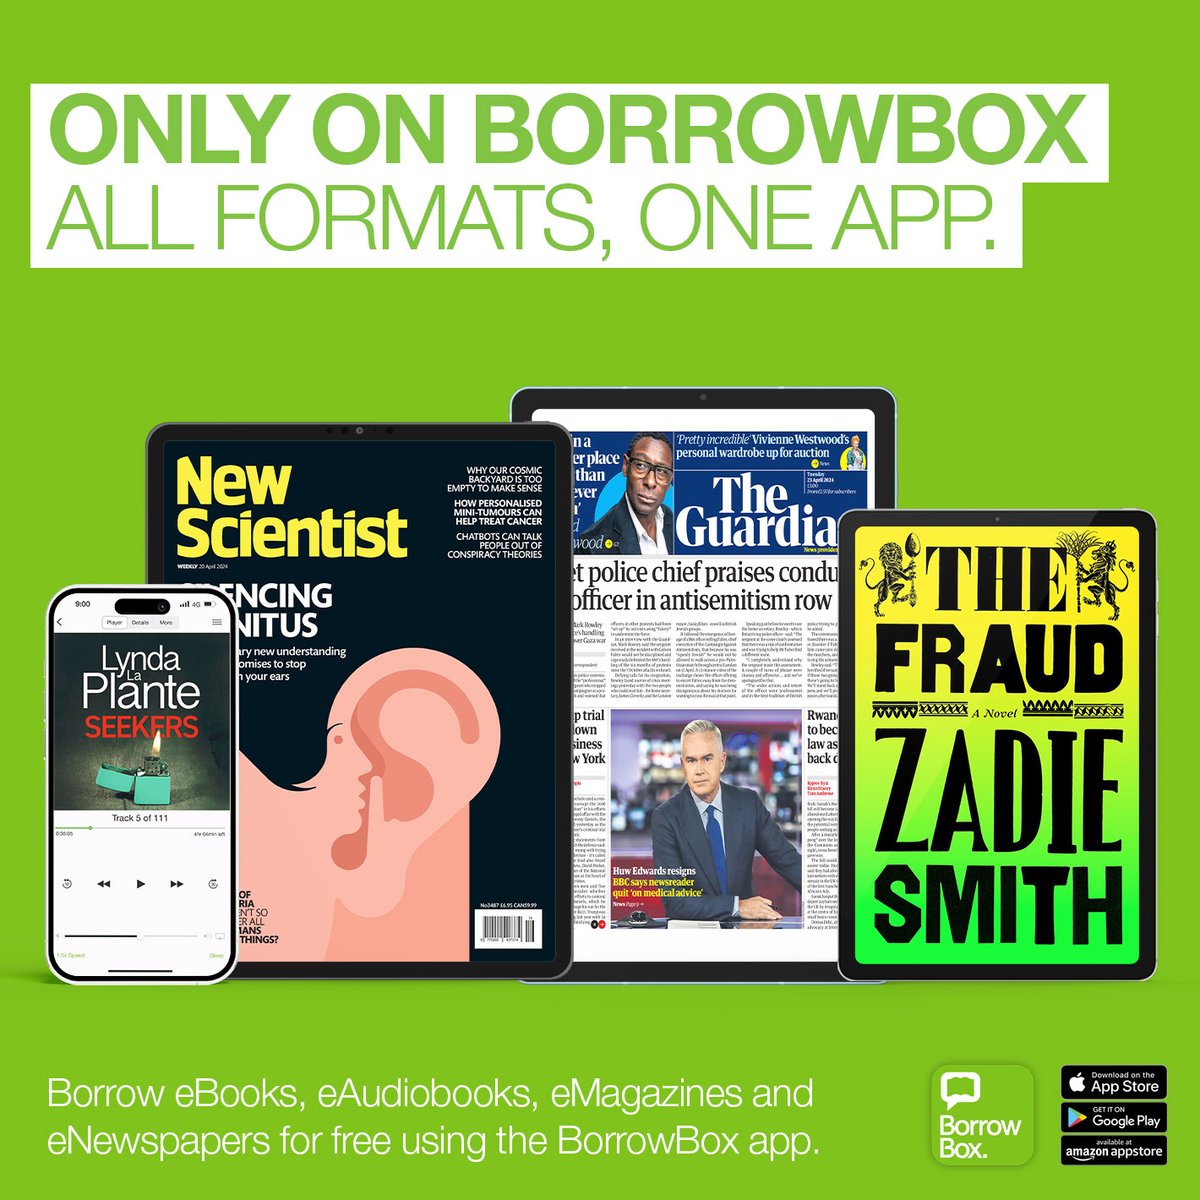 Great news! From May 1st you’ll be able to read your favourite newspapers and magazines on #BorrowBox! That means #eBooks, #eaudiobooks, newspapers and magazines all in one place, 24/7!